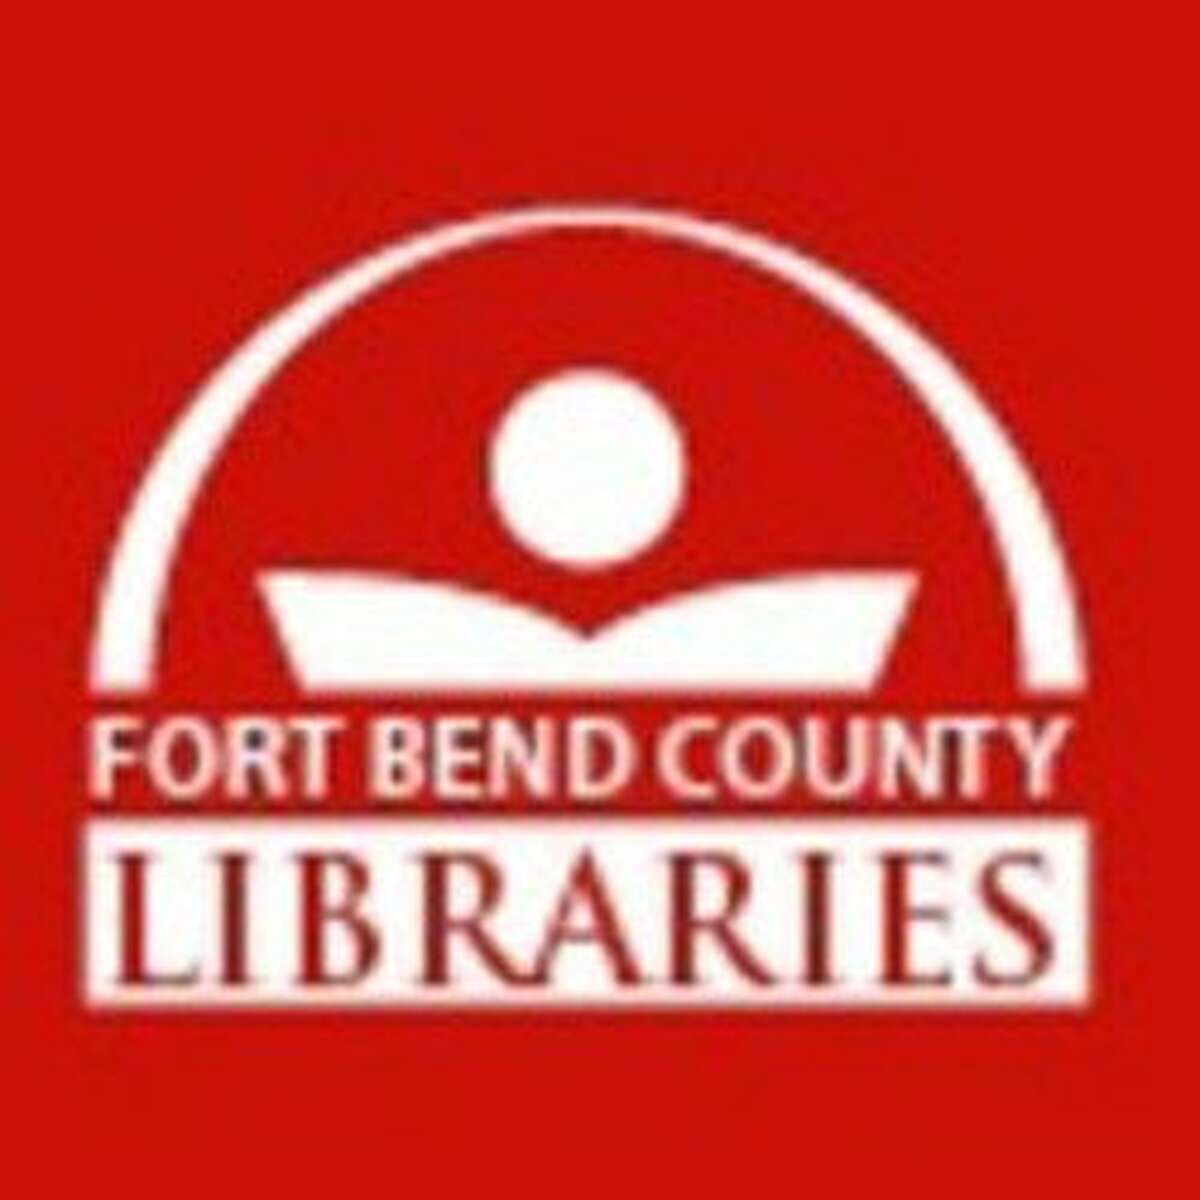 Fort Bend County Libraries plan special programs for Family Reading Club